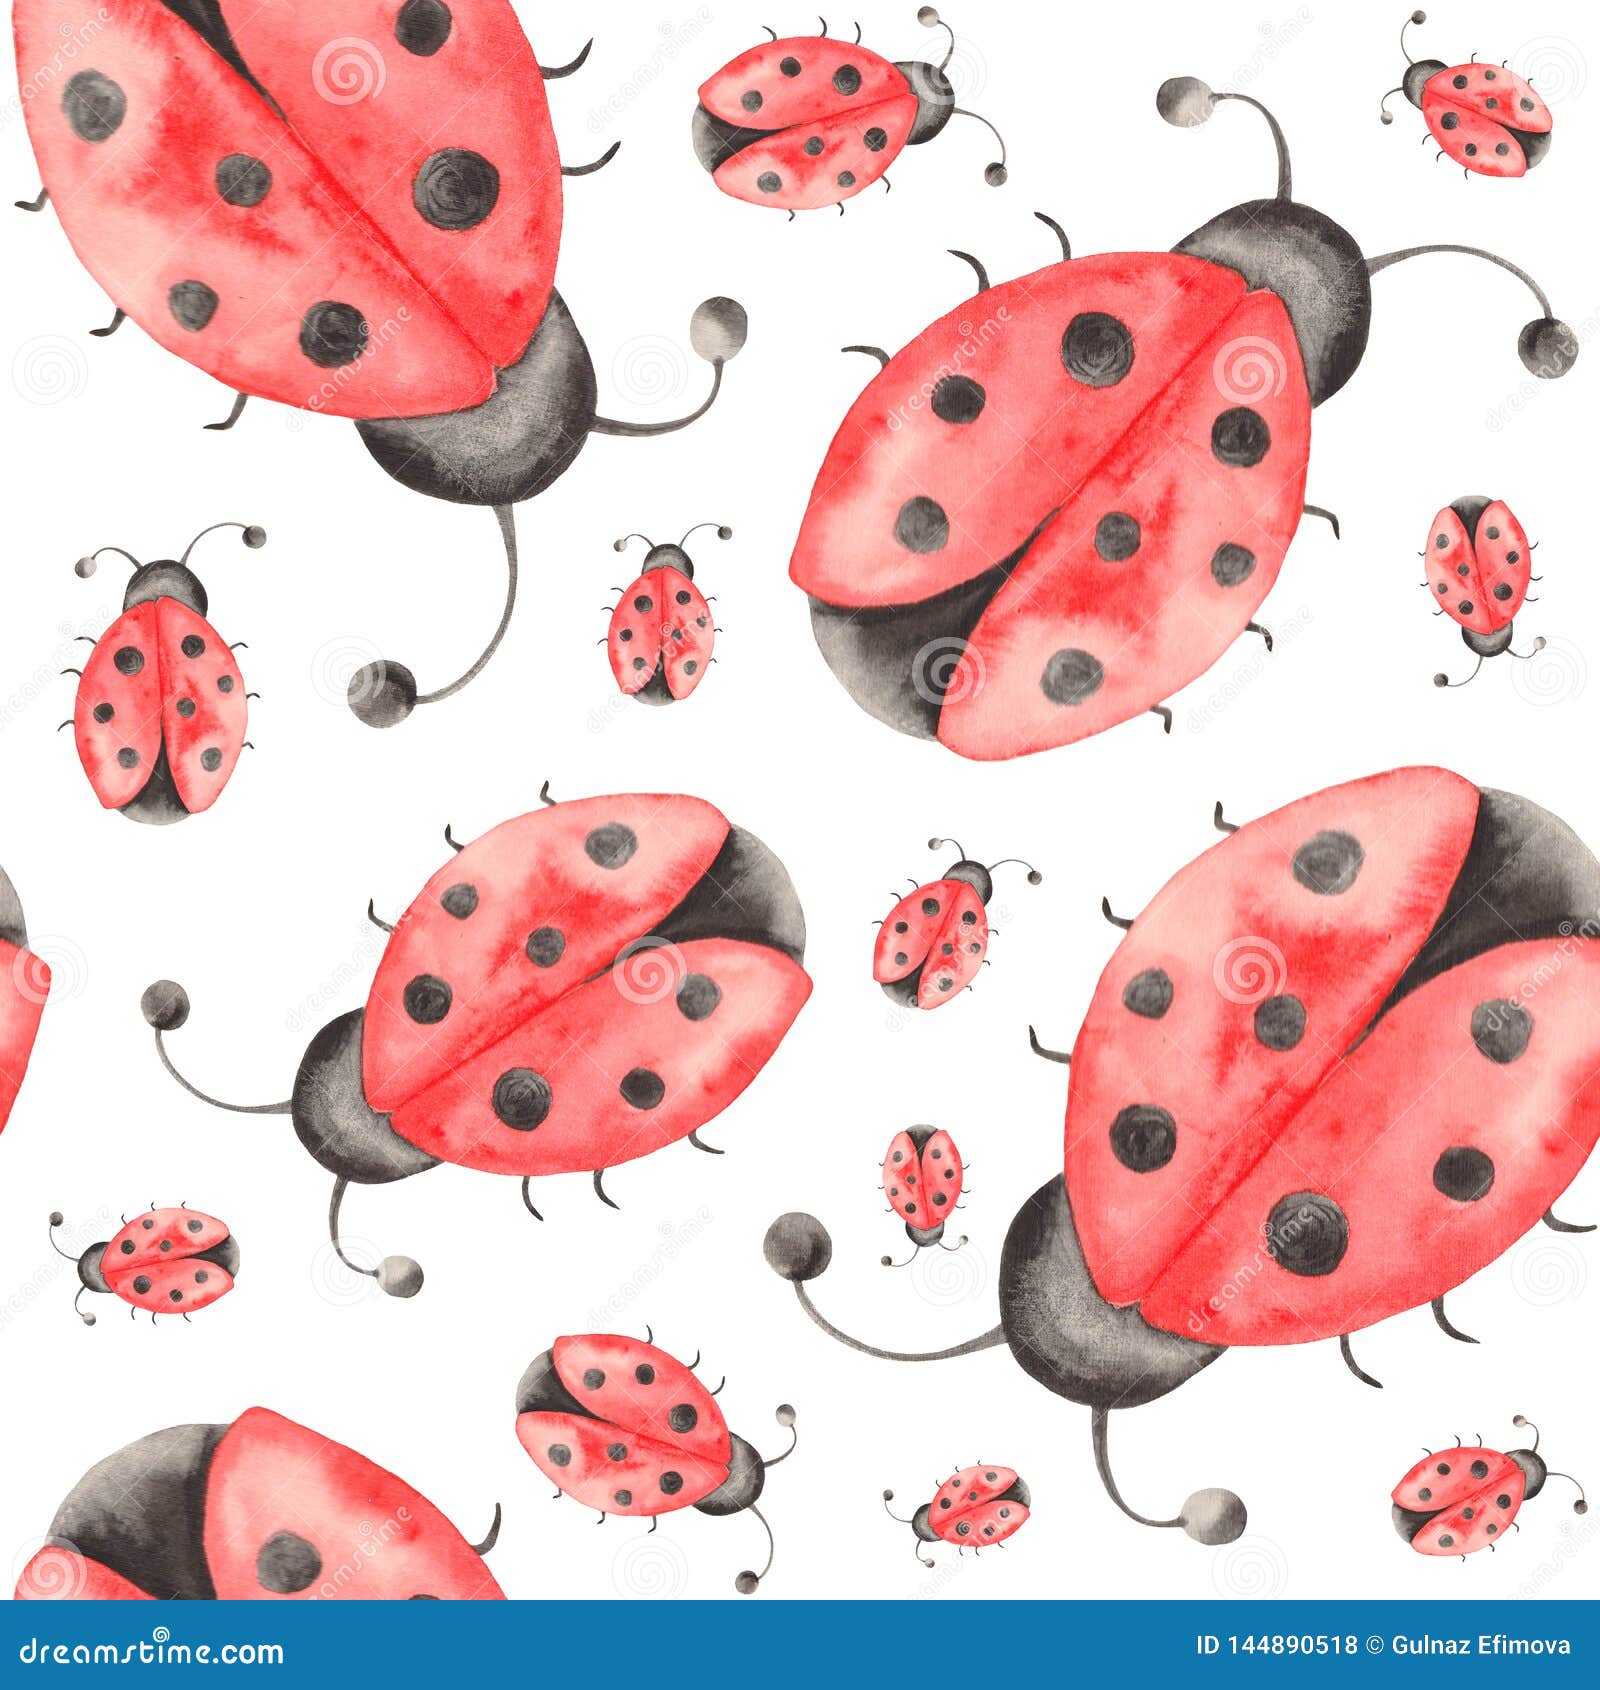 watercolor pattern of insects, ladybugs, bedbugs, beetles with leaves on a white background.